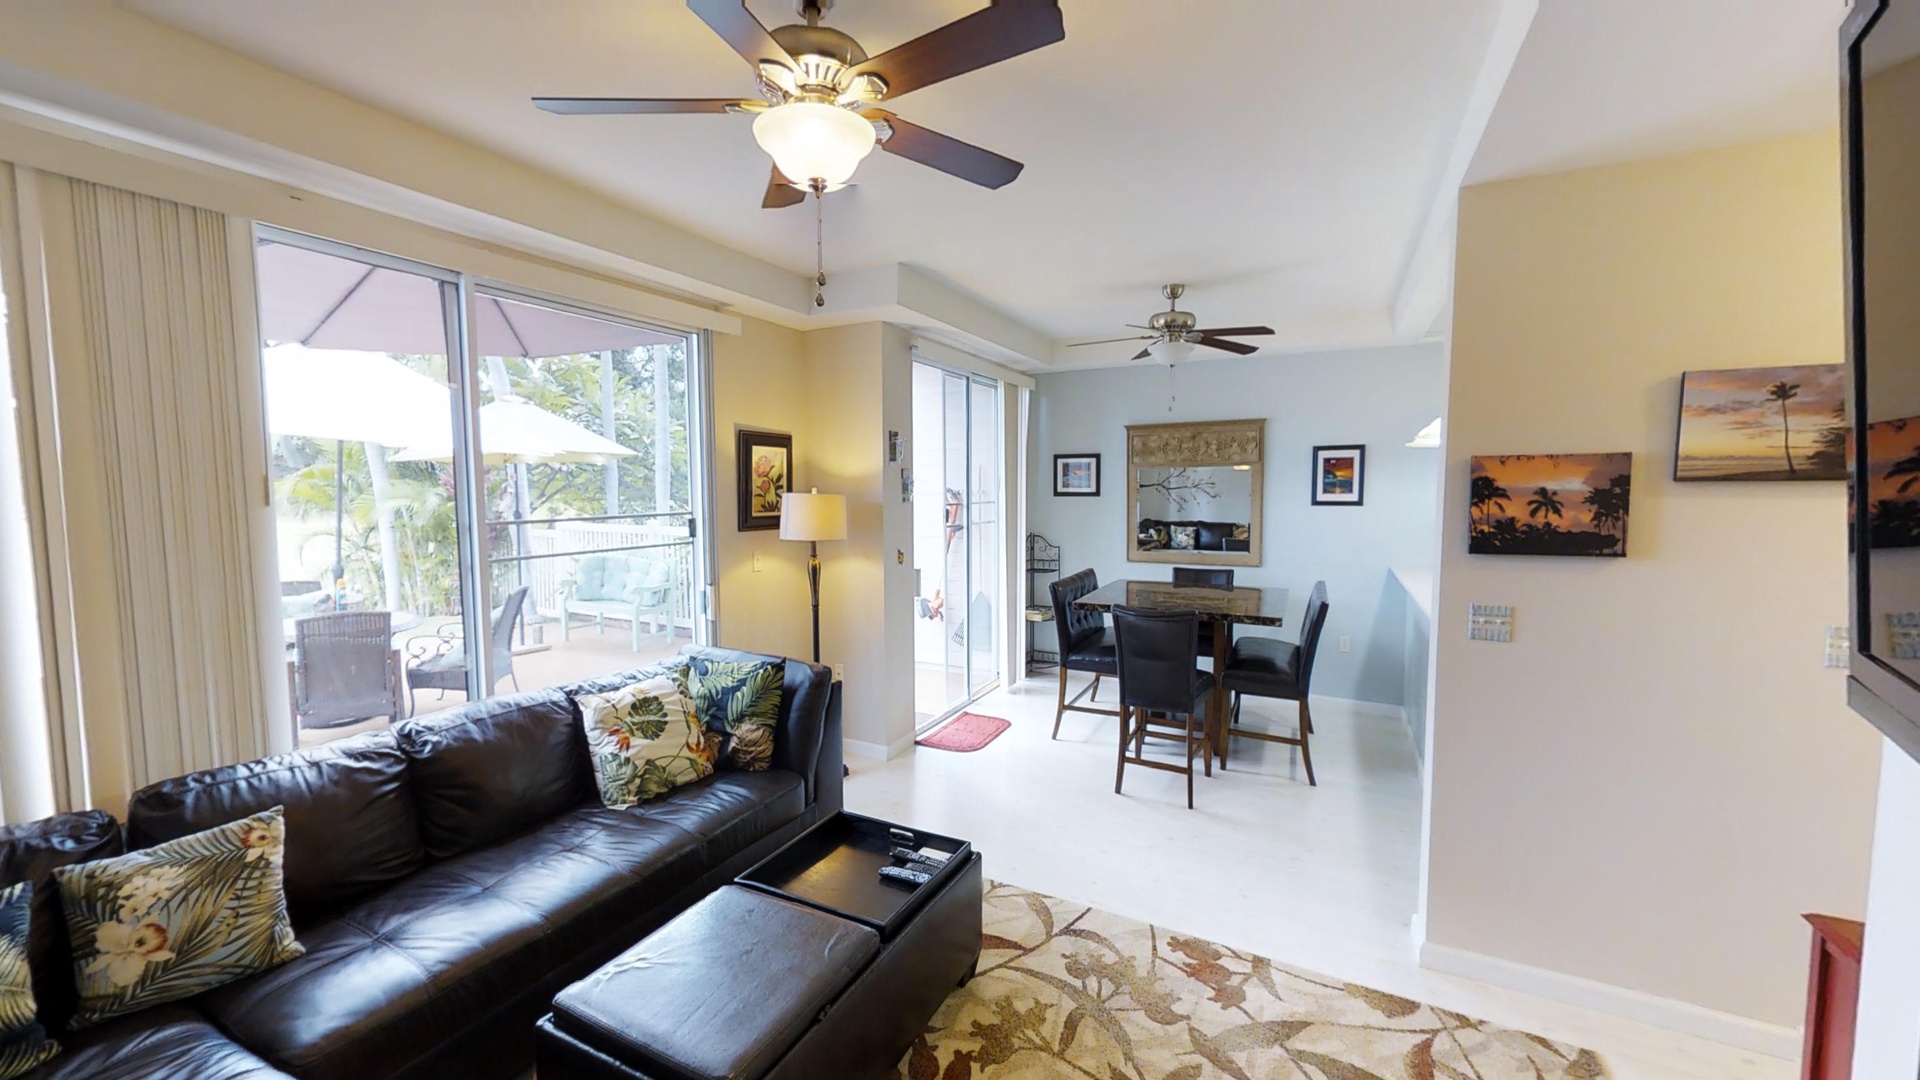 Kapolei Vacation Rentals, Fairways at Ko Olina 8G - The open living area is comfortably appointed with natural lighting.